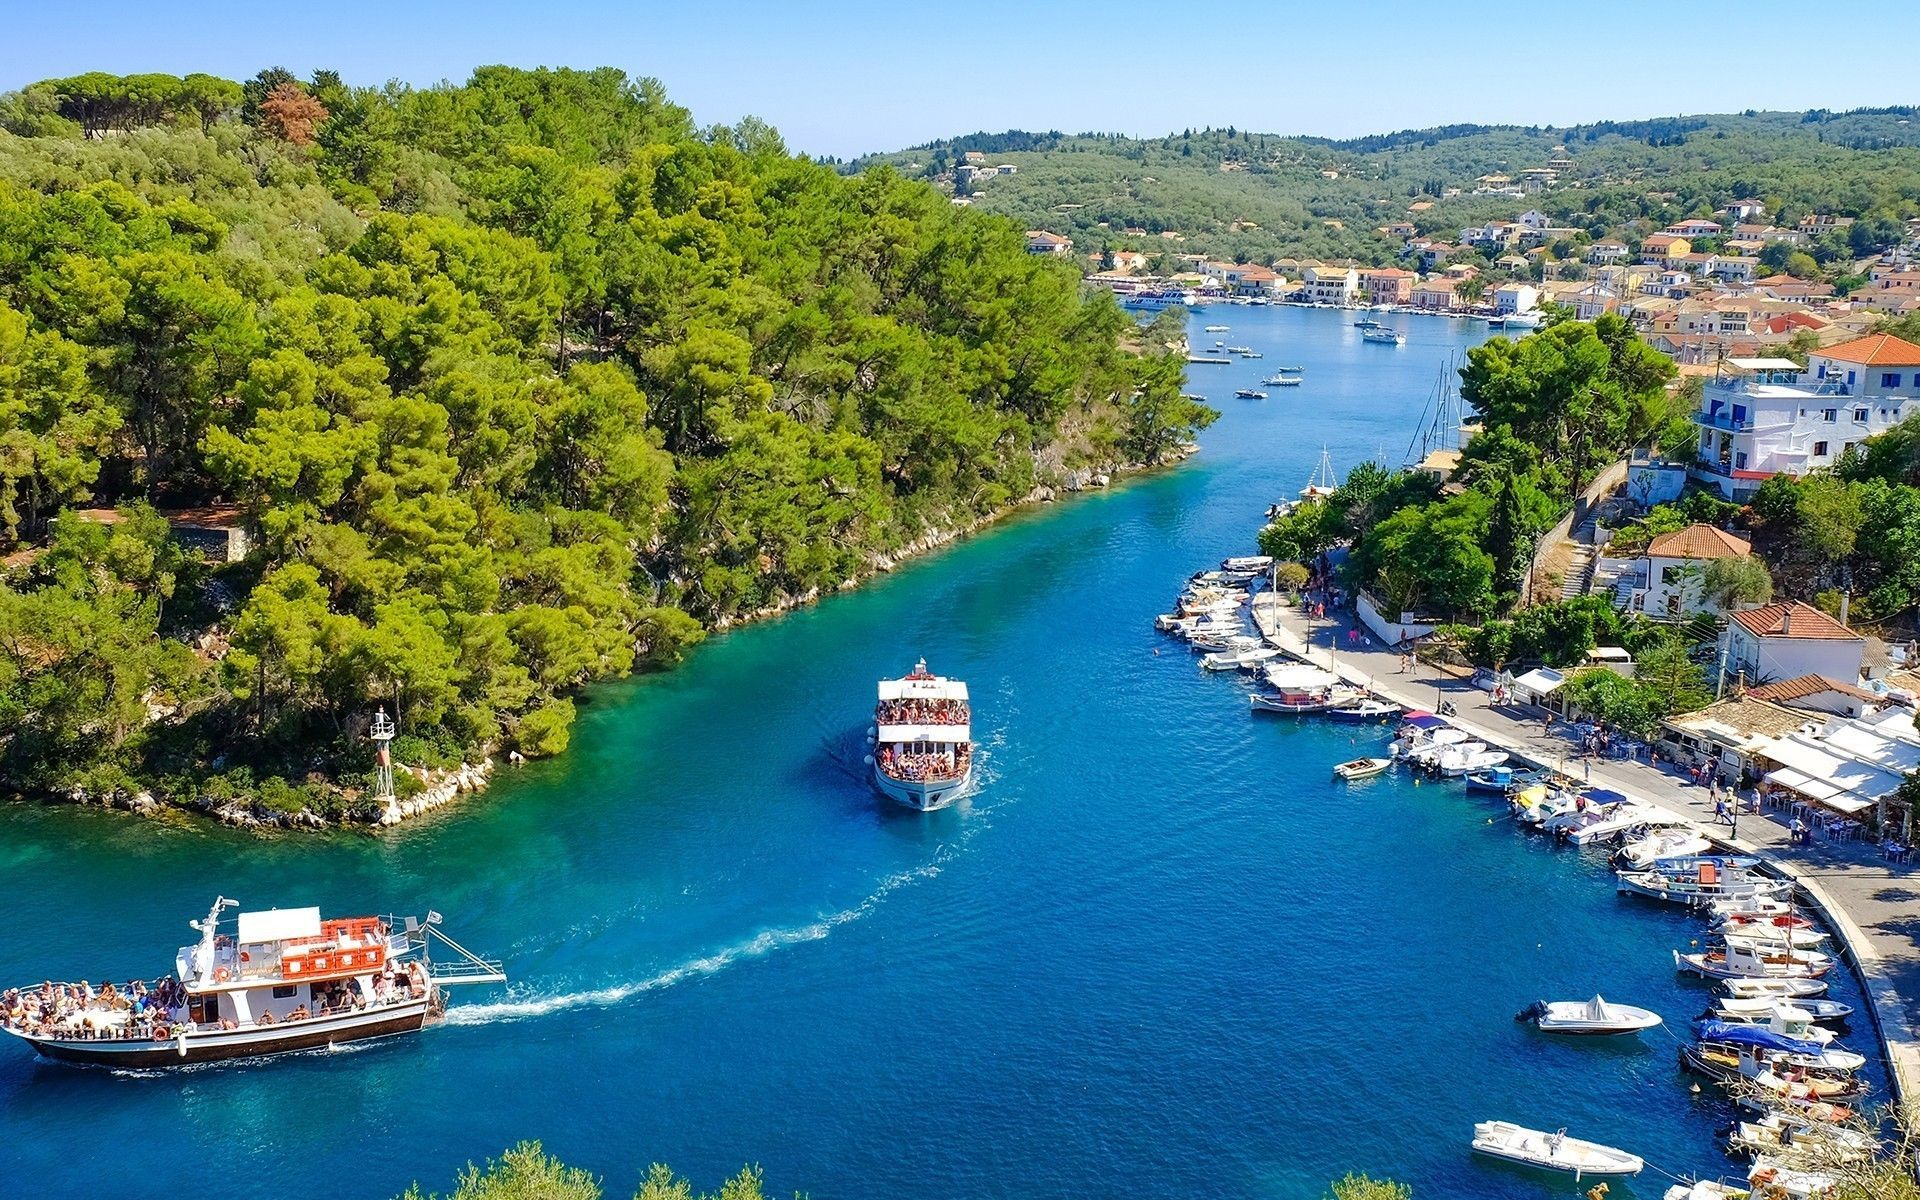 shutterstock_459792658_Paxos_island_panorama_with_boat_entering_the_grand_canal_a971e4f165.jpeg